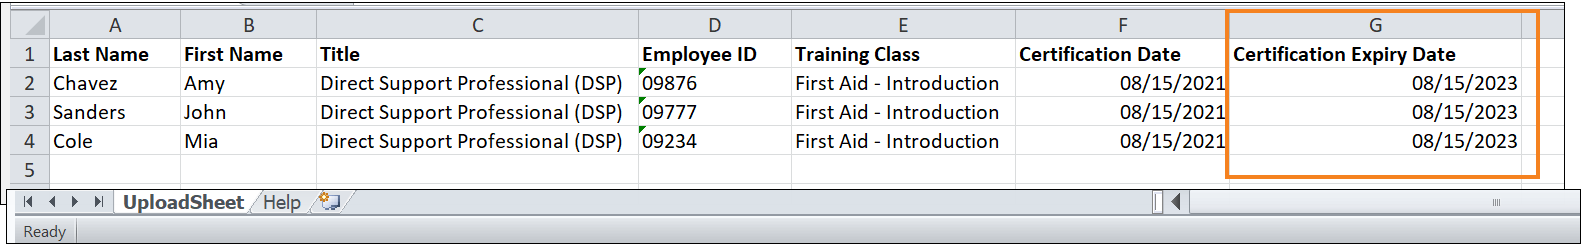 Screenshot of UploadSheet tab in the Excel template file for importing certificates.